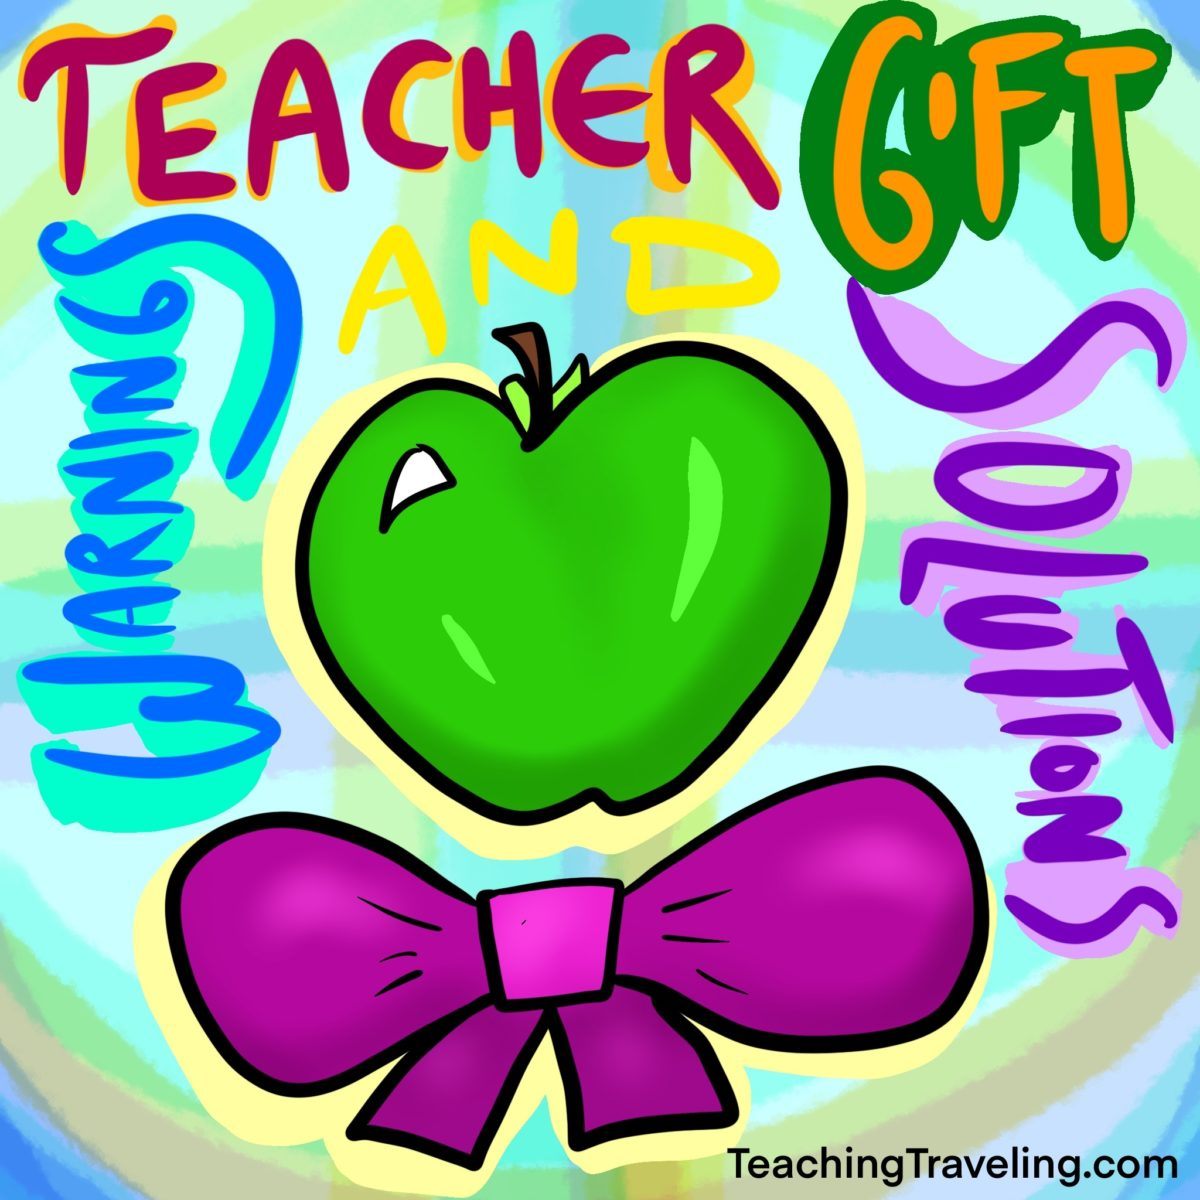 Teacher gift ideas for holidays and appreciation